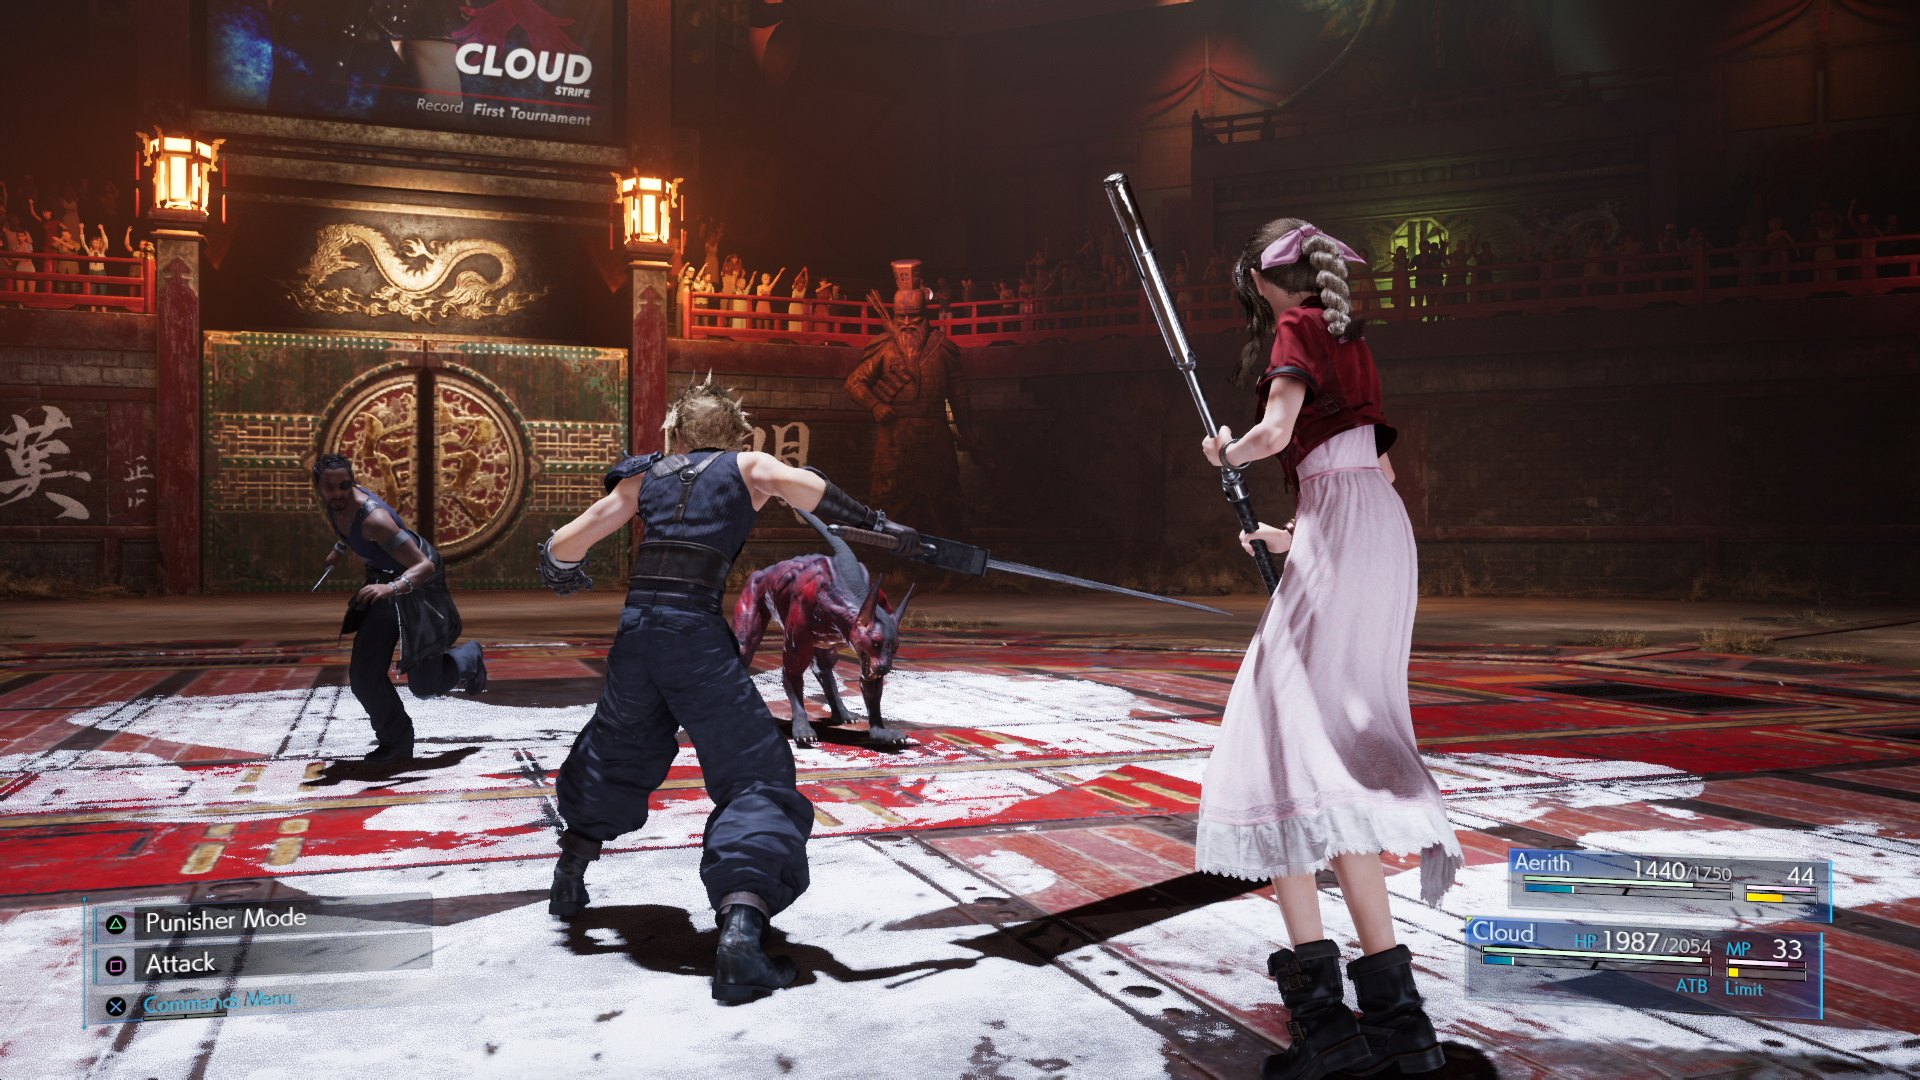 Cloud and Aerith in Final Fantasy VII Remake